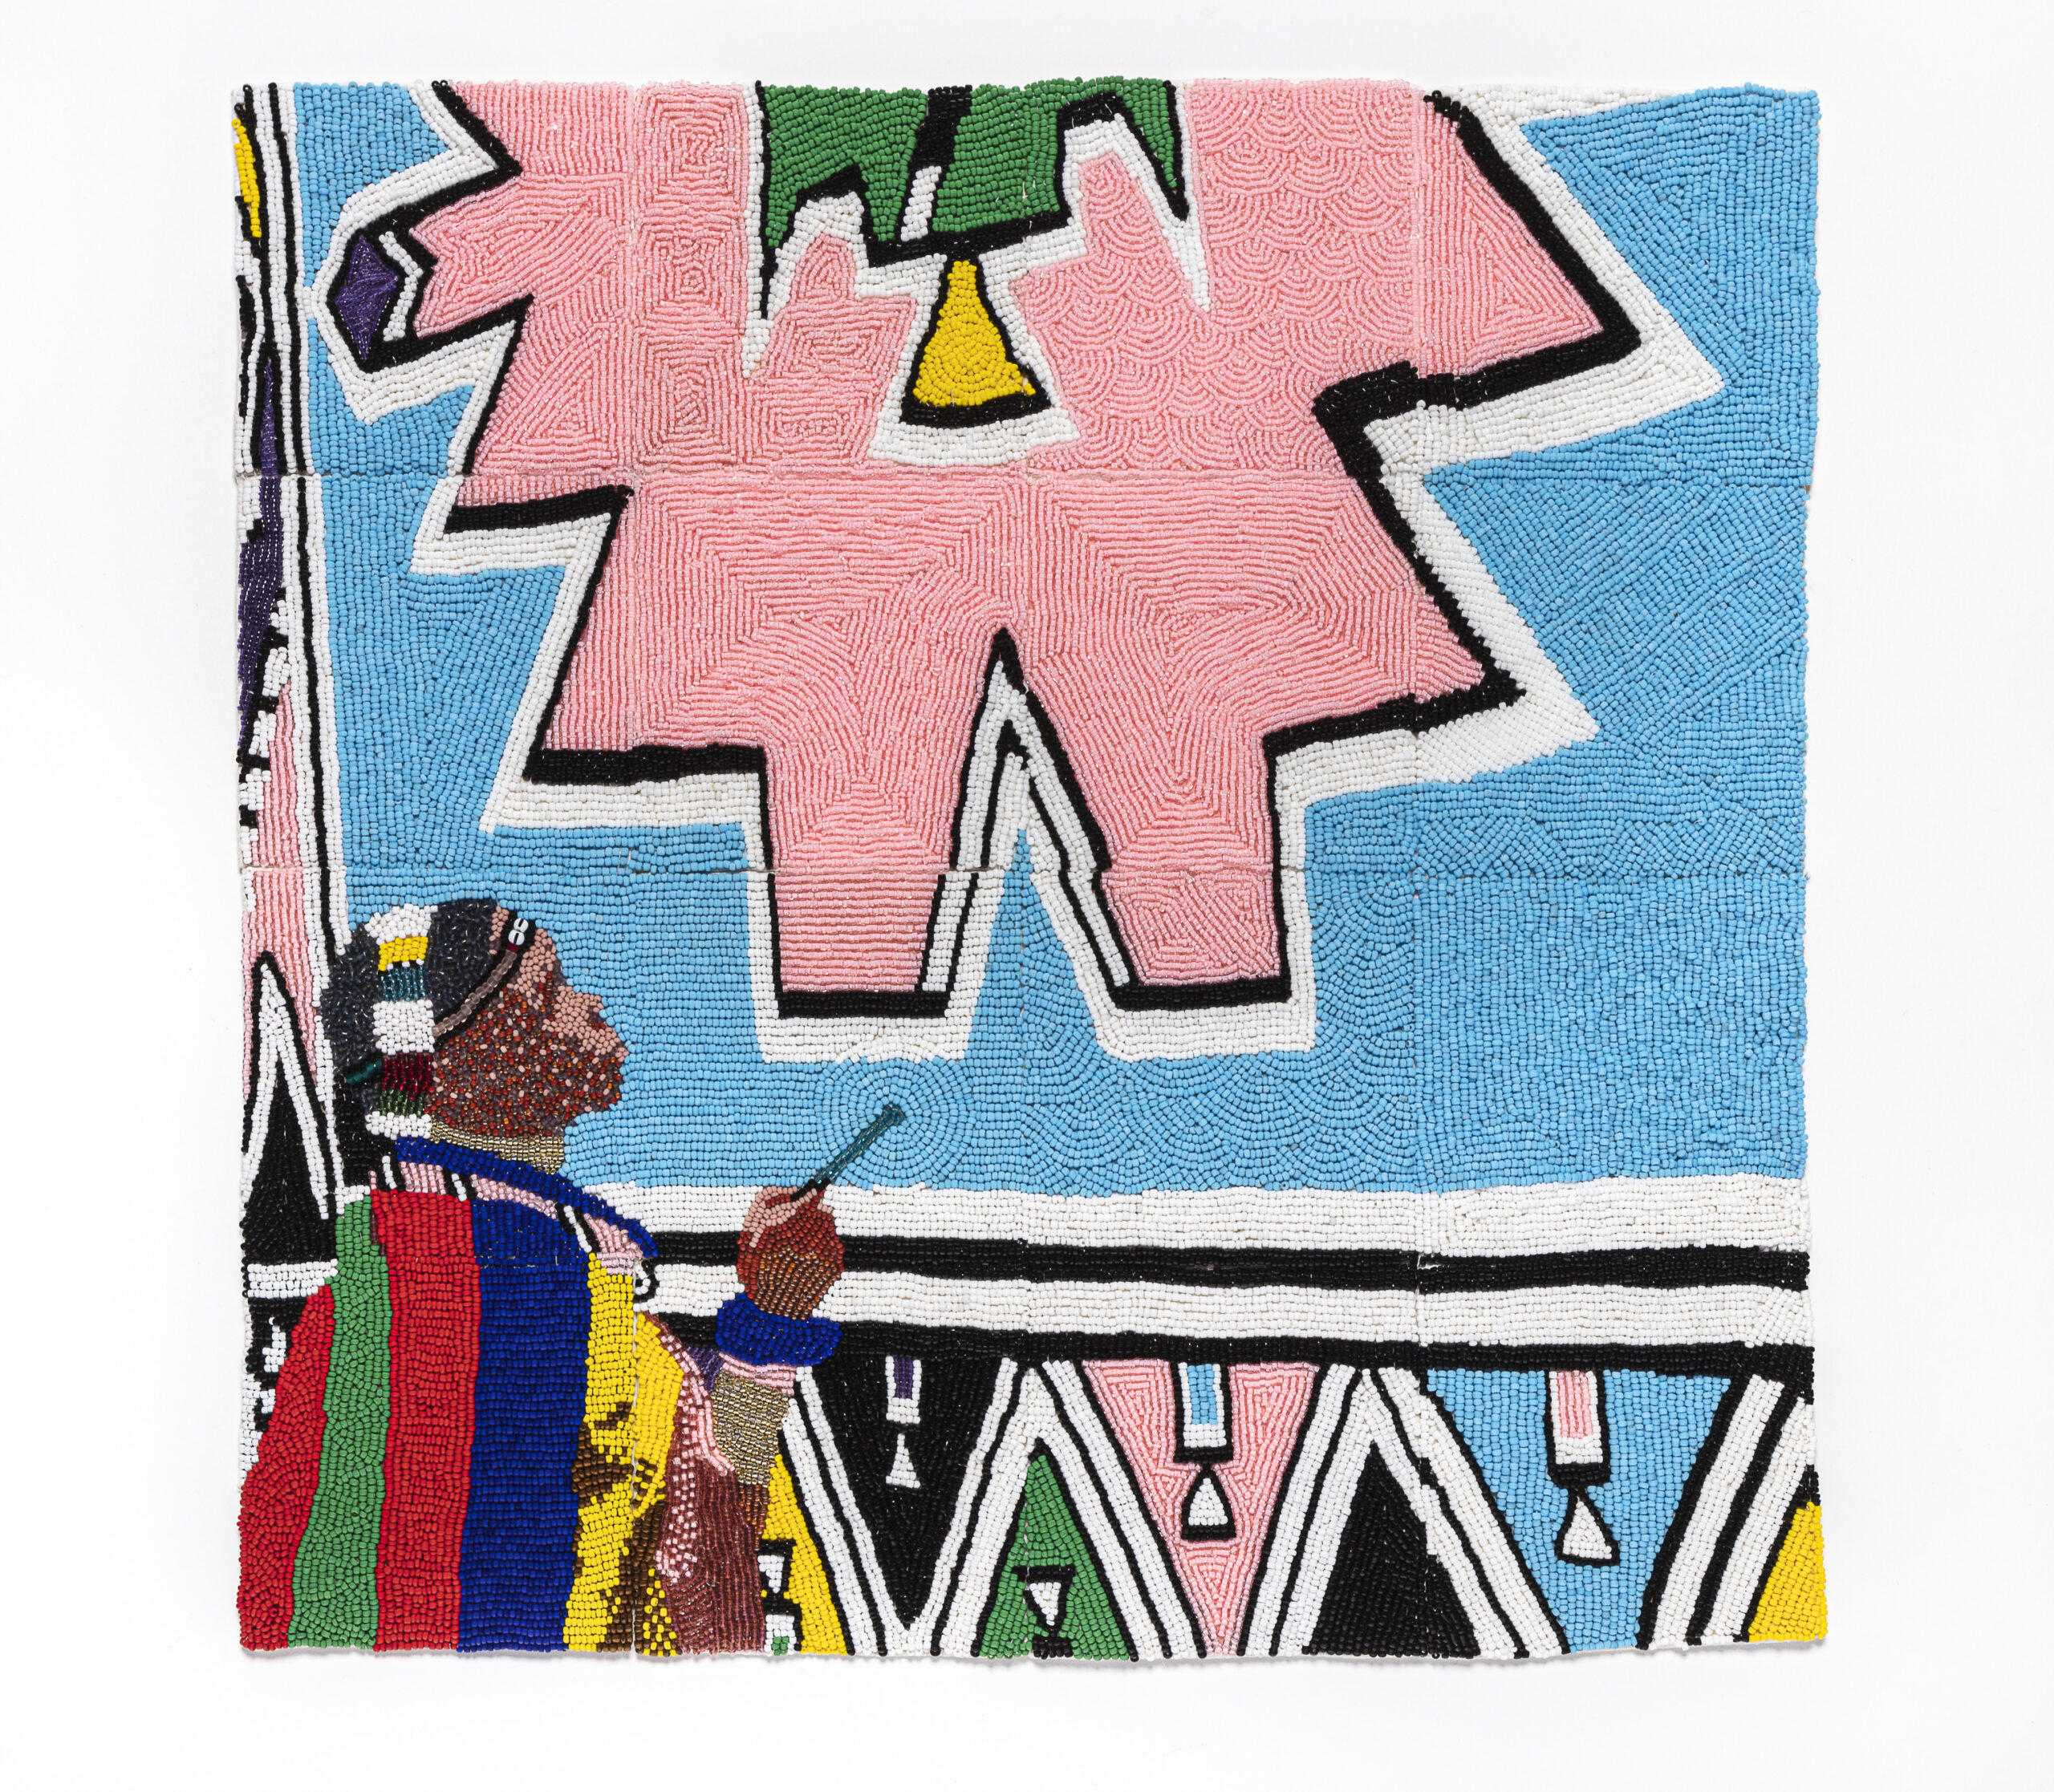 Tiny, colorful beads arranged in patterns to depict Esther Mahlangu painting a large artwork of geometric shapes in light pink and blue, black, white, yellow, and green. She is a dark-skinned adult woman wearing colorfully patterned robes.